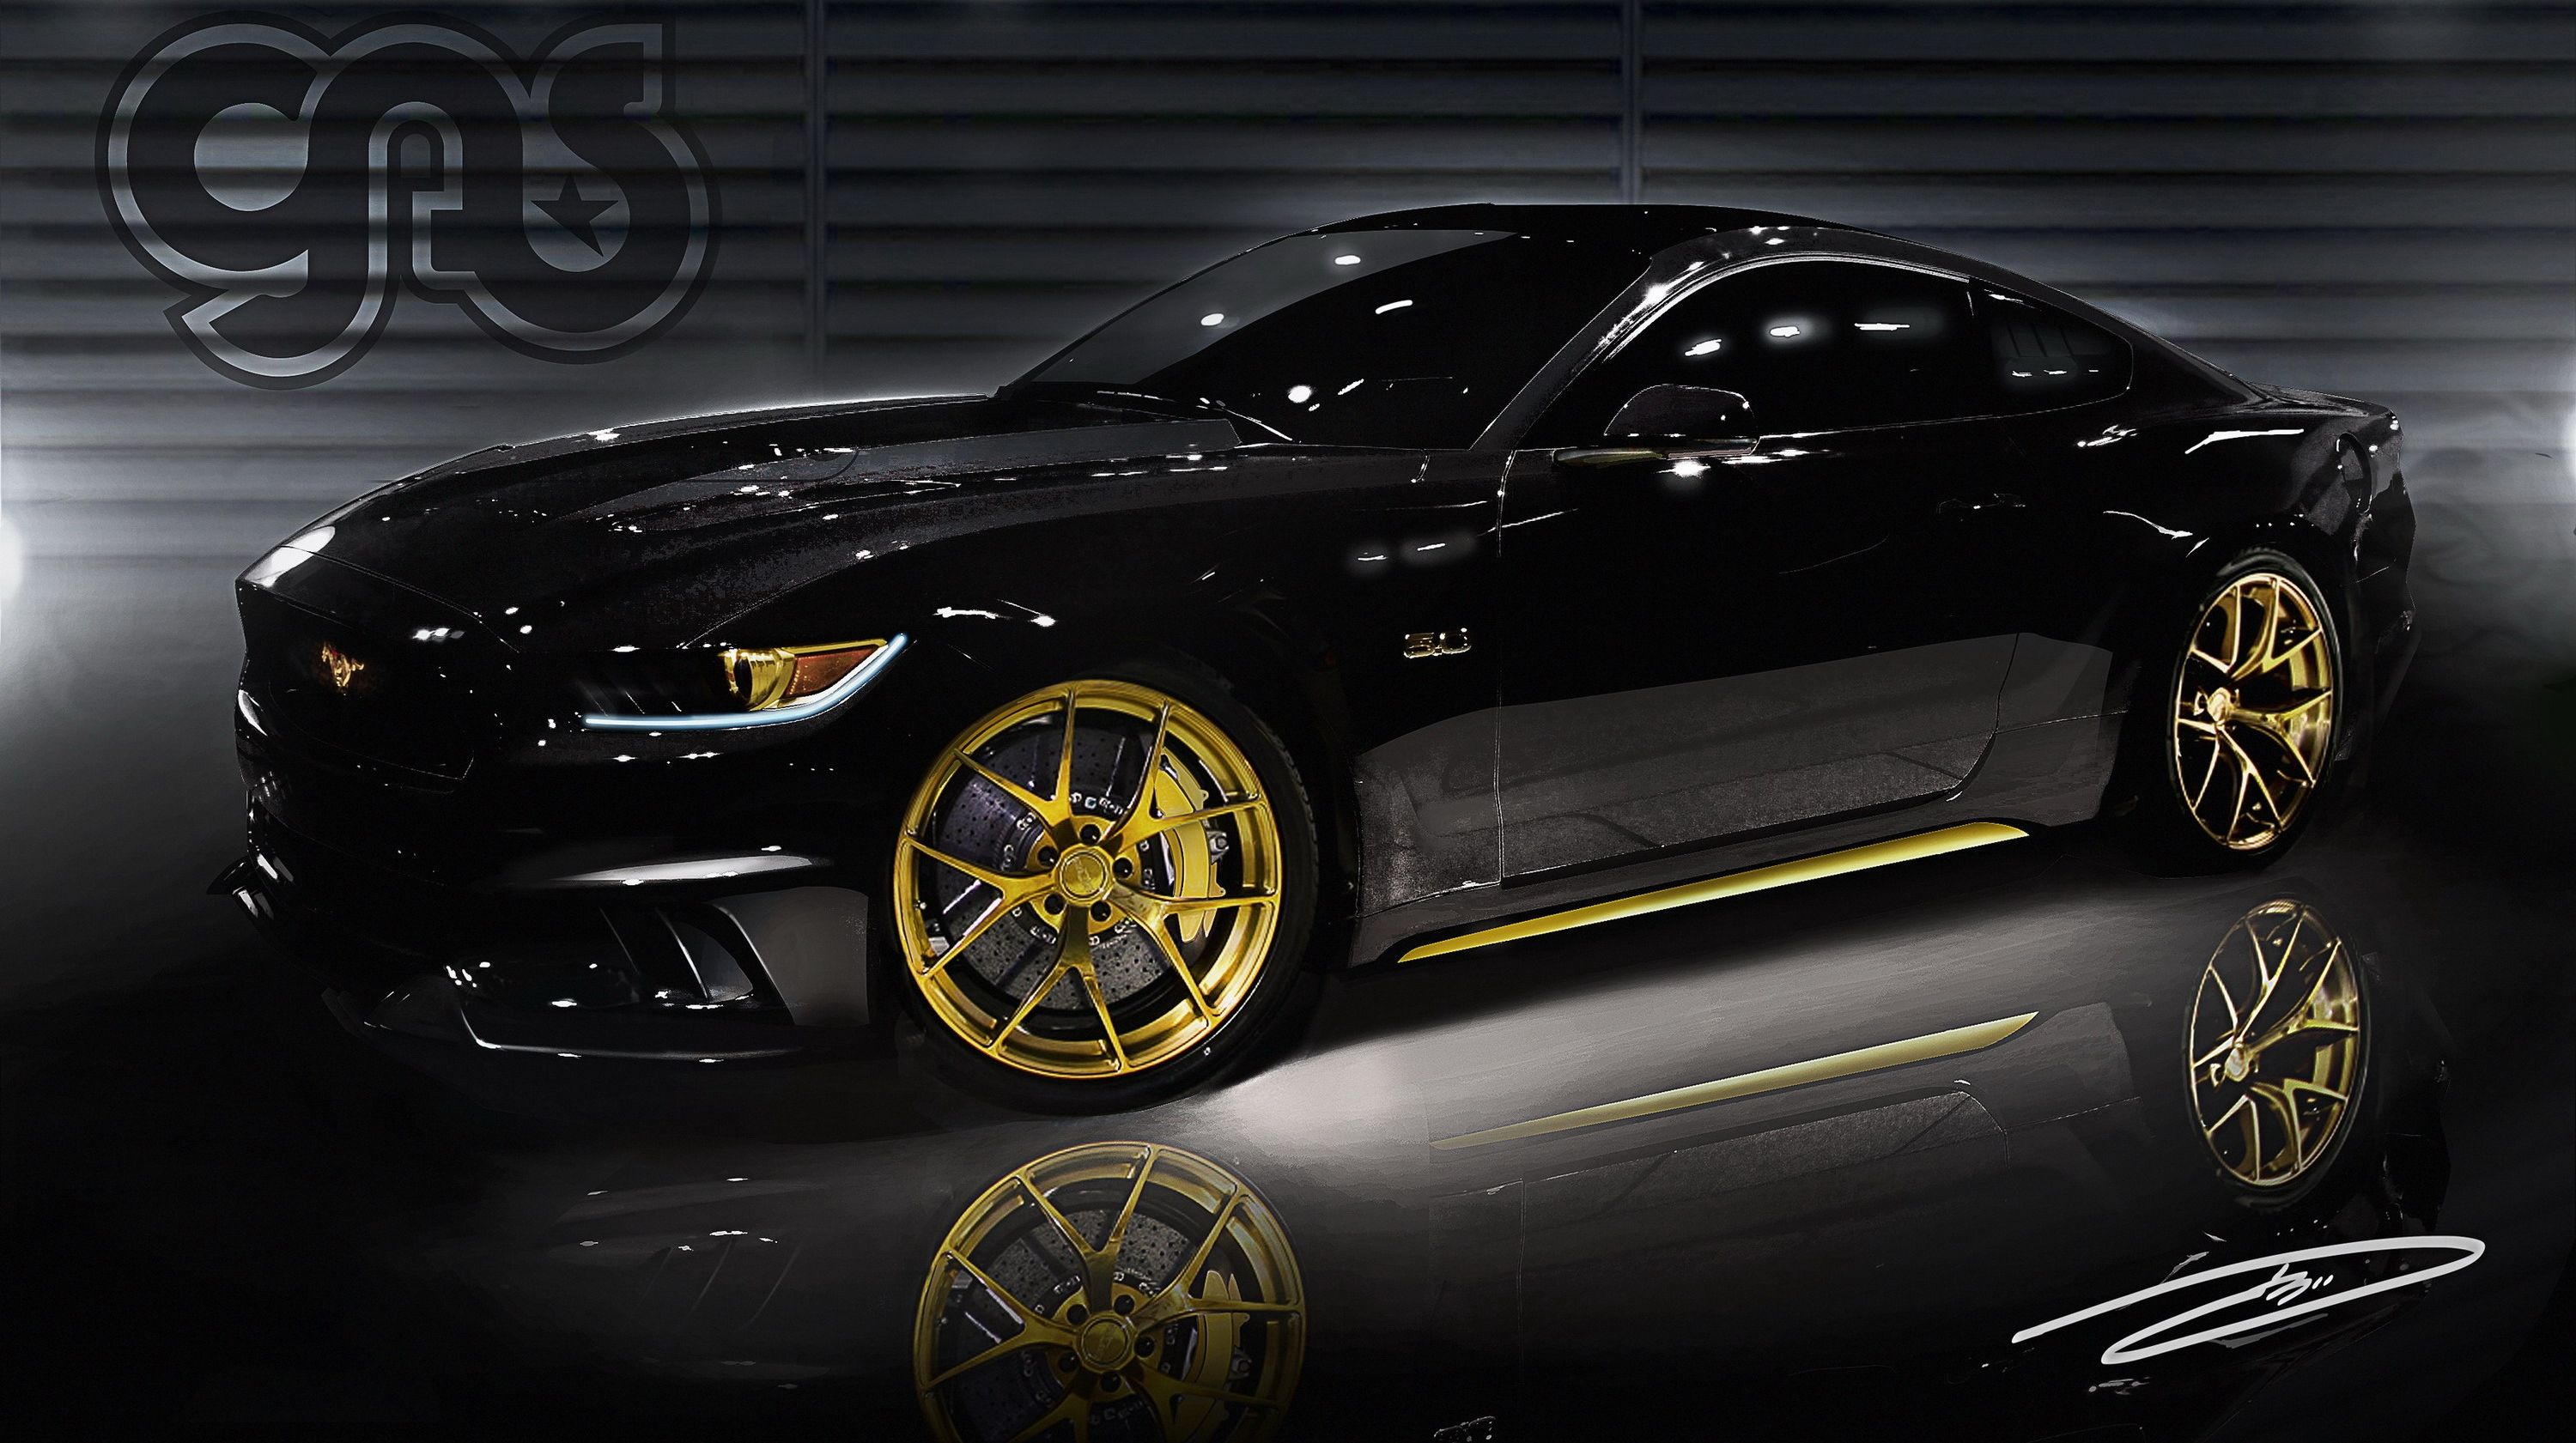  This black and gold Mustang is much more than a fancy-looking show car; it packs some serious heat under its hood. 